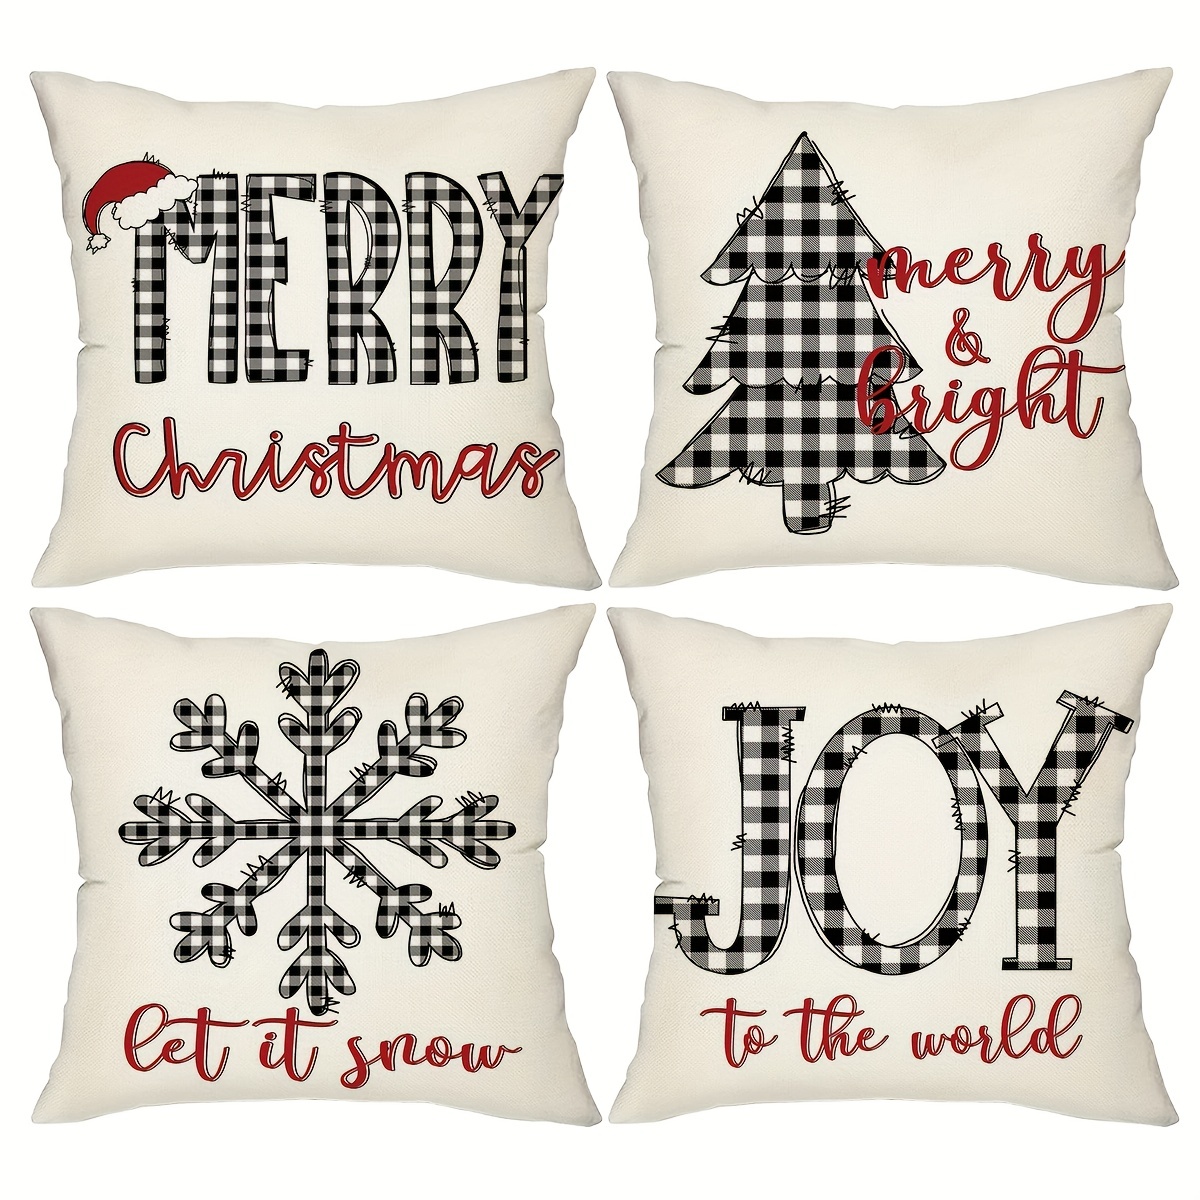 Joy Hope Love Peace Christmas Sublimation Pillow Cover, Red Or White  Buffalo Plaid Pillow, Home Decor, Housewarming Gift